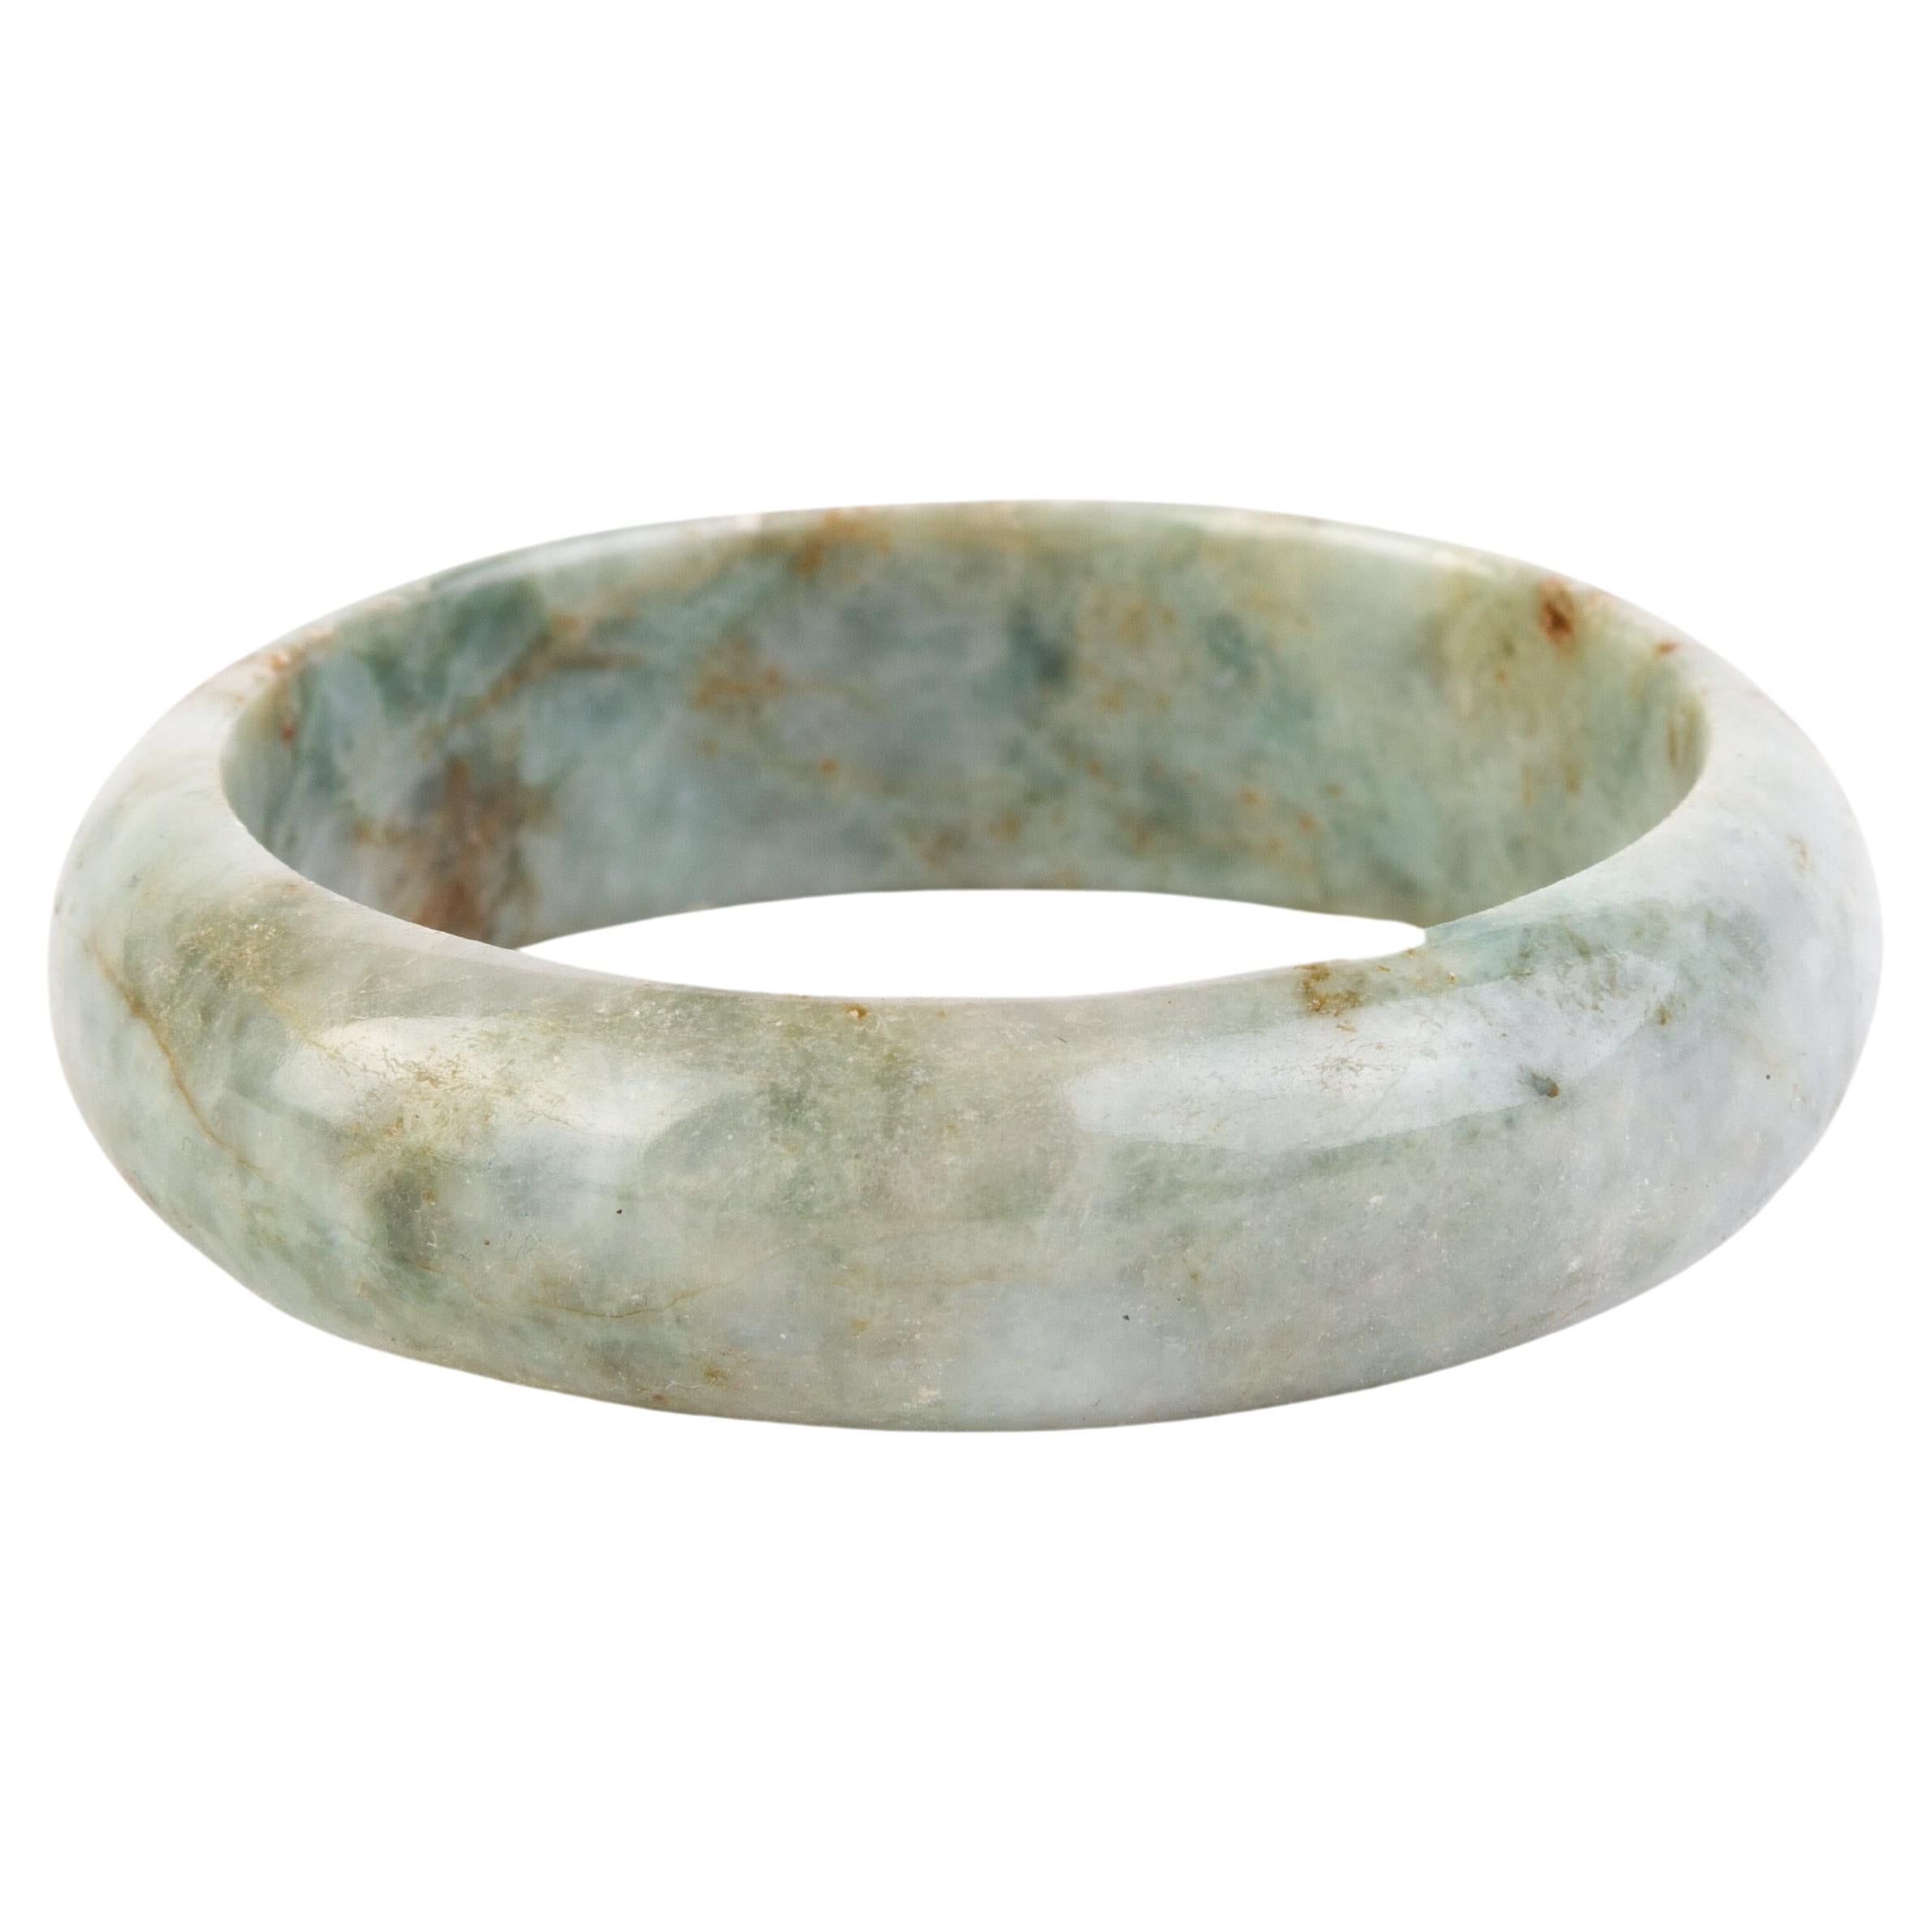 In good condition
From a private collection
Free international shipping
Chinese Celadon & Russet Jade Bangle Bracelet 